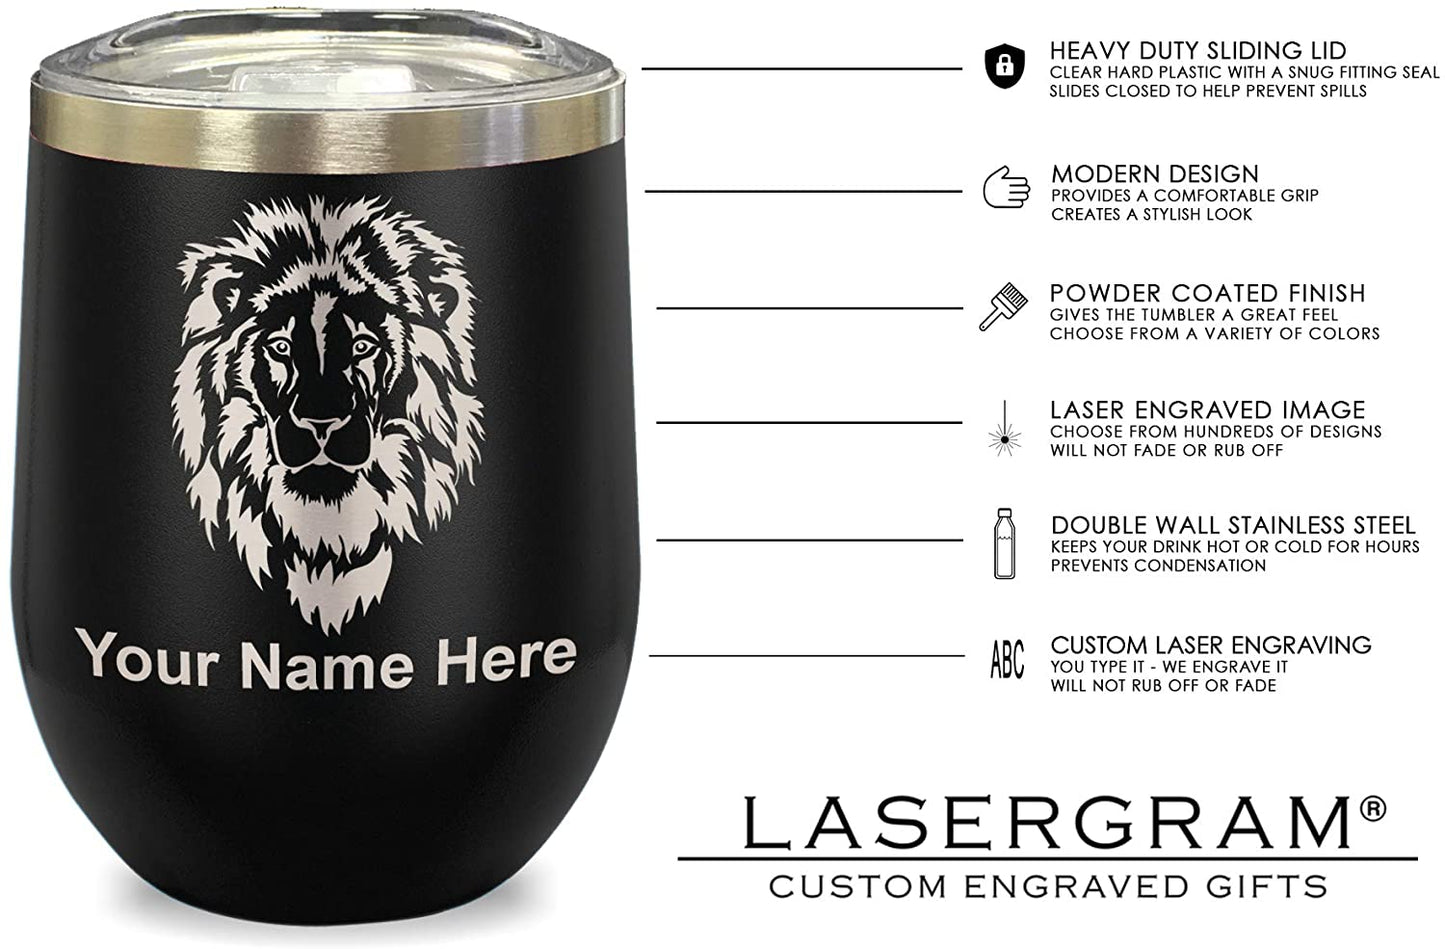 LaserGram Double Wall Stainless Steel Wine Glass, Zodiac Sign Aquarius, Personalized Engraving Included